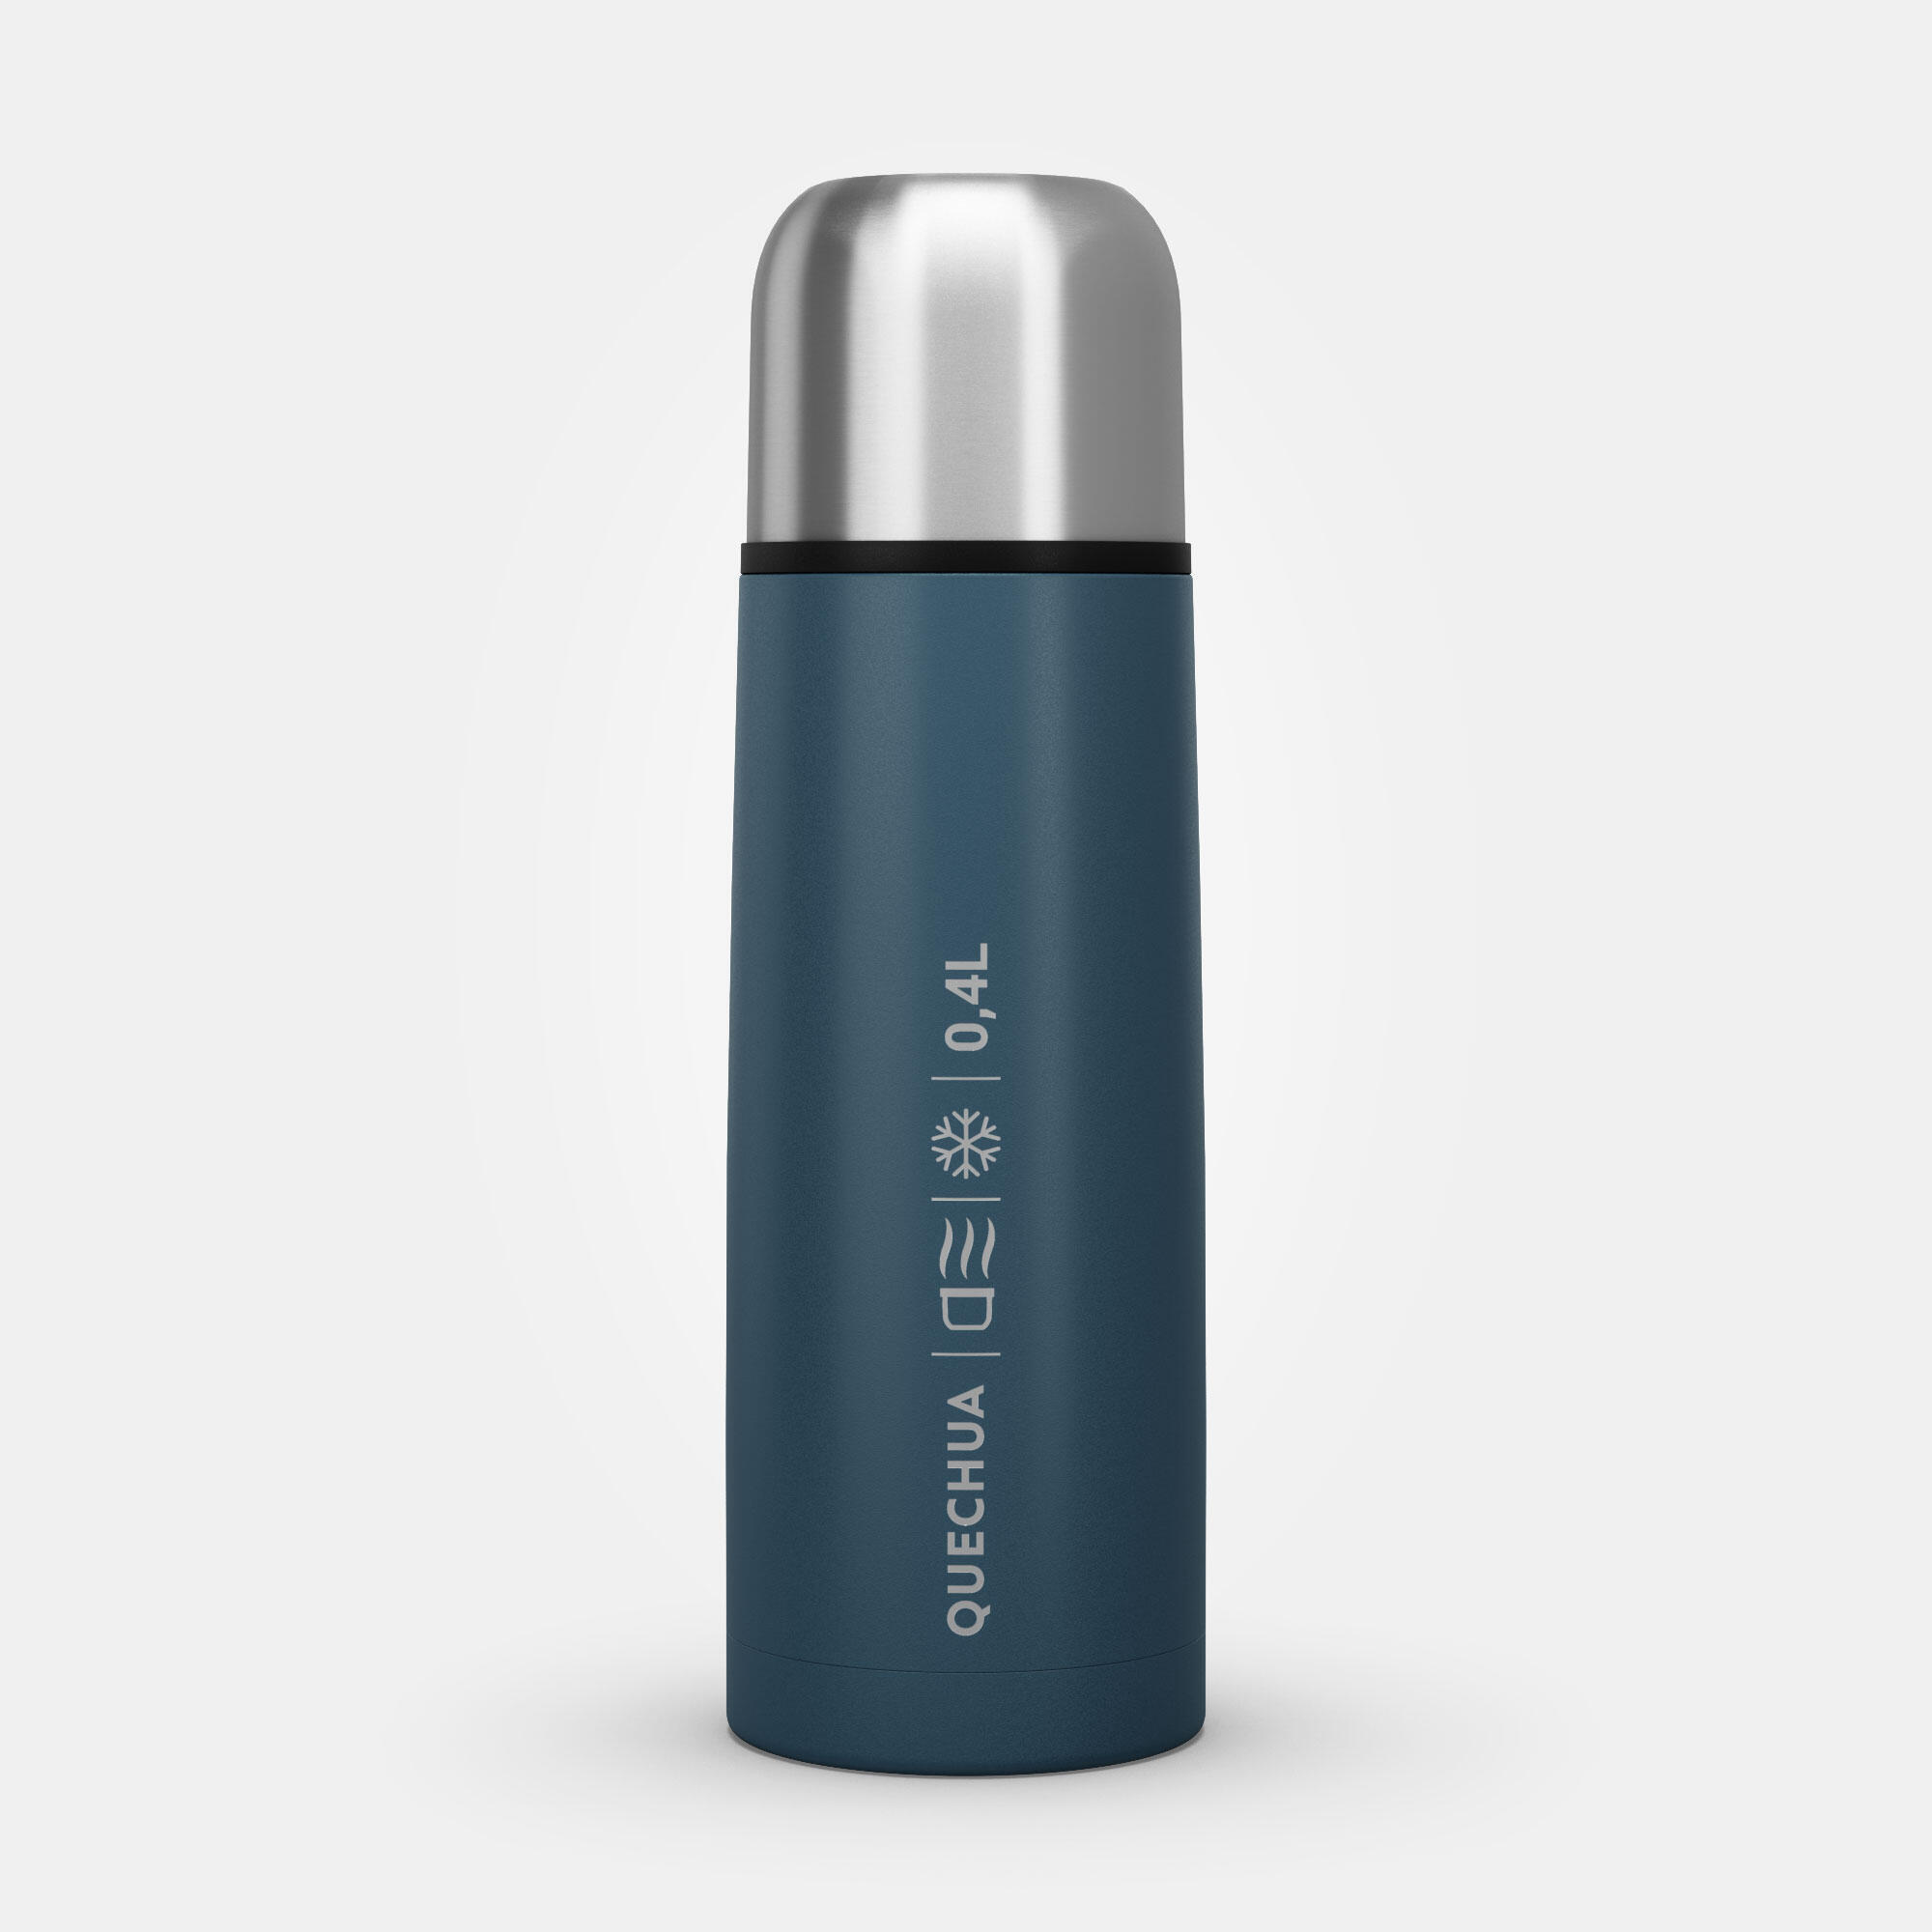 0.4 L Stainless Steel Isothermal Flask with Cup for Hiking - Blue 10/10